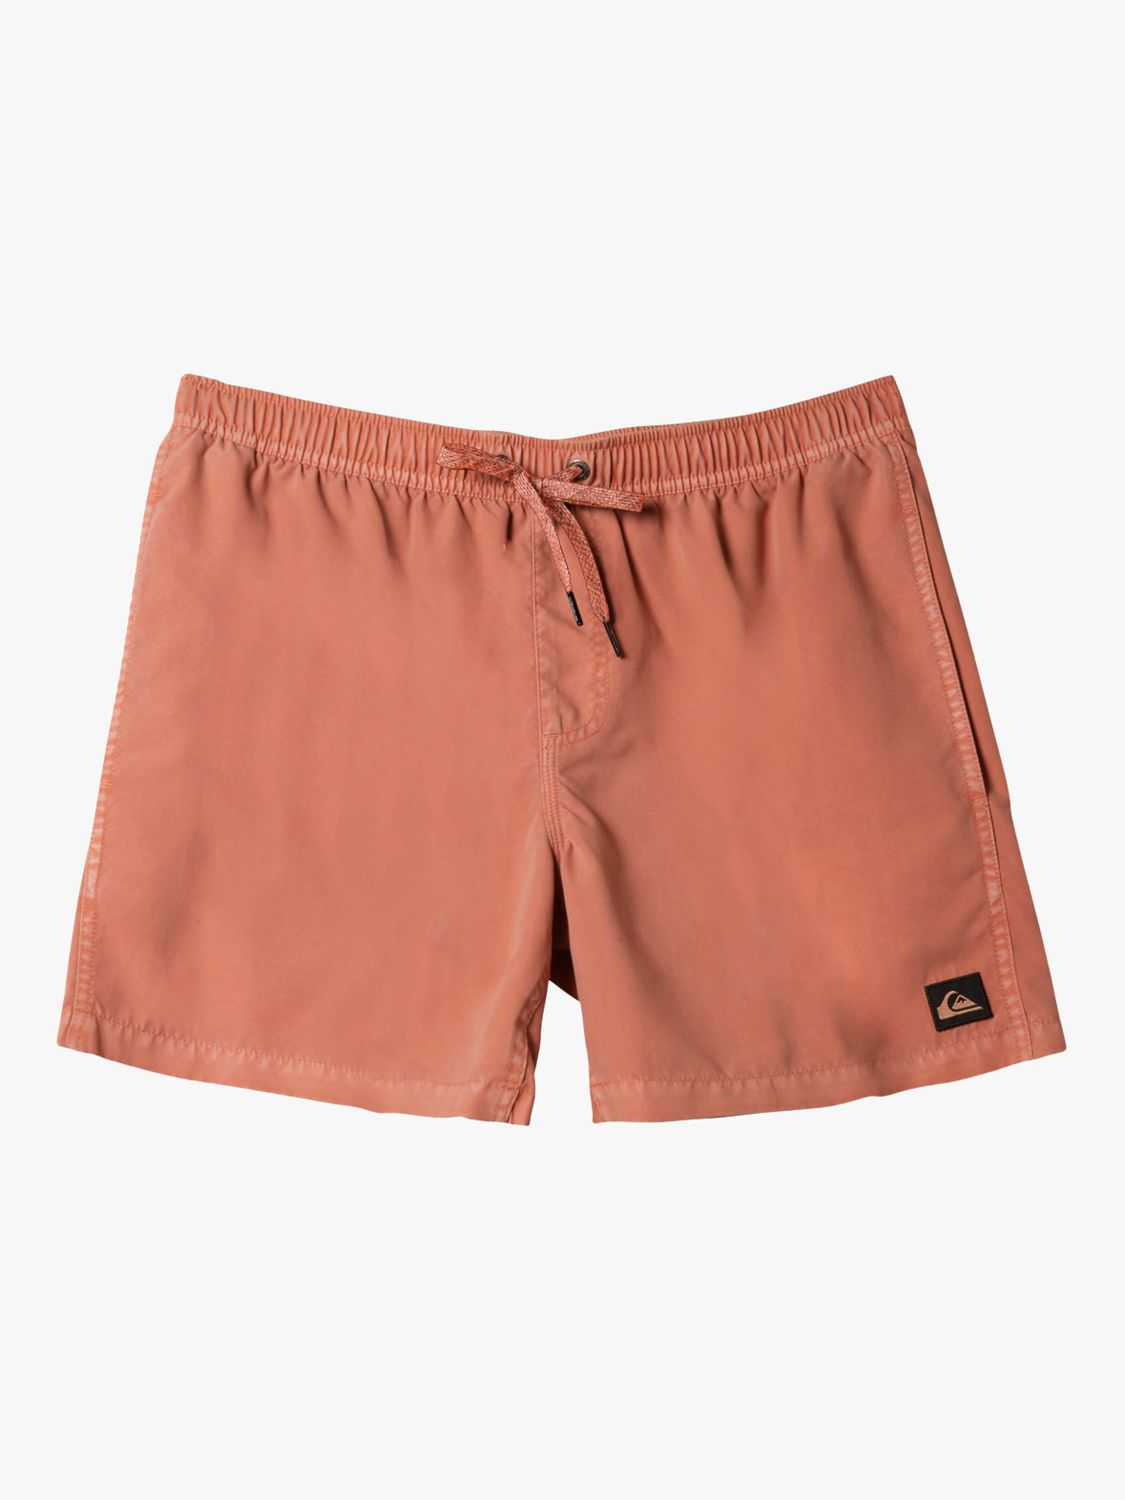 Quiksilver Everyday Collection Recycled Swim Shorts, Canyon Clay, S